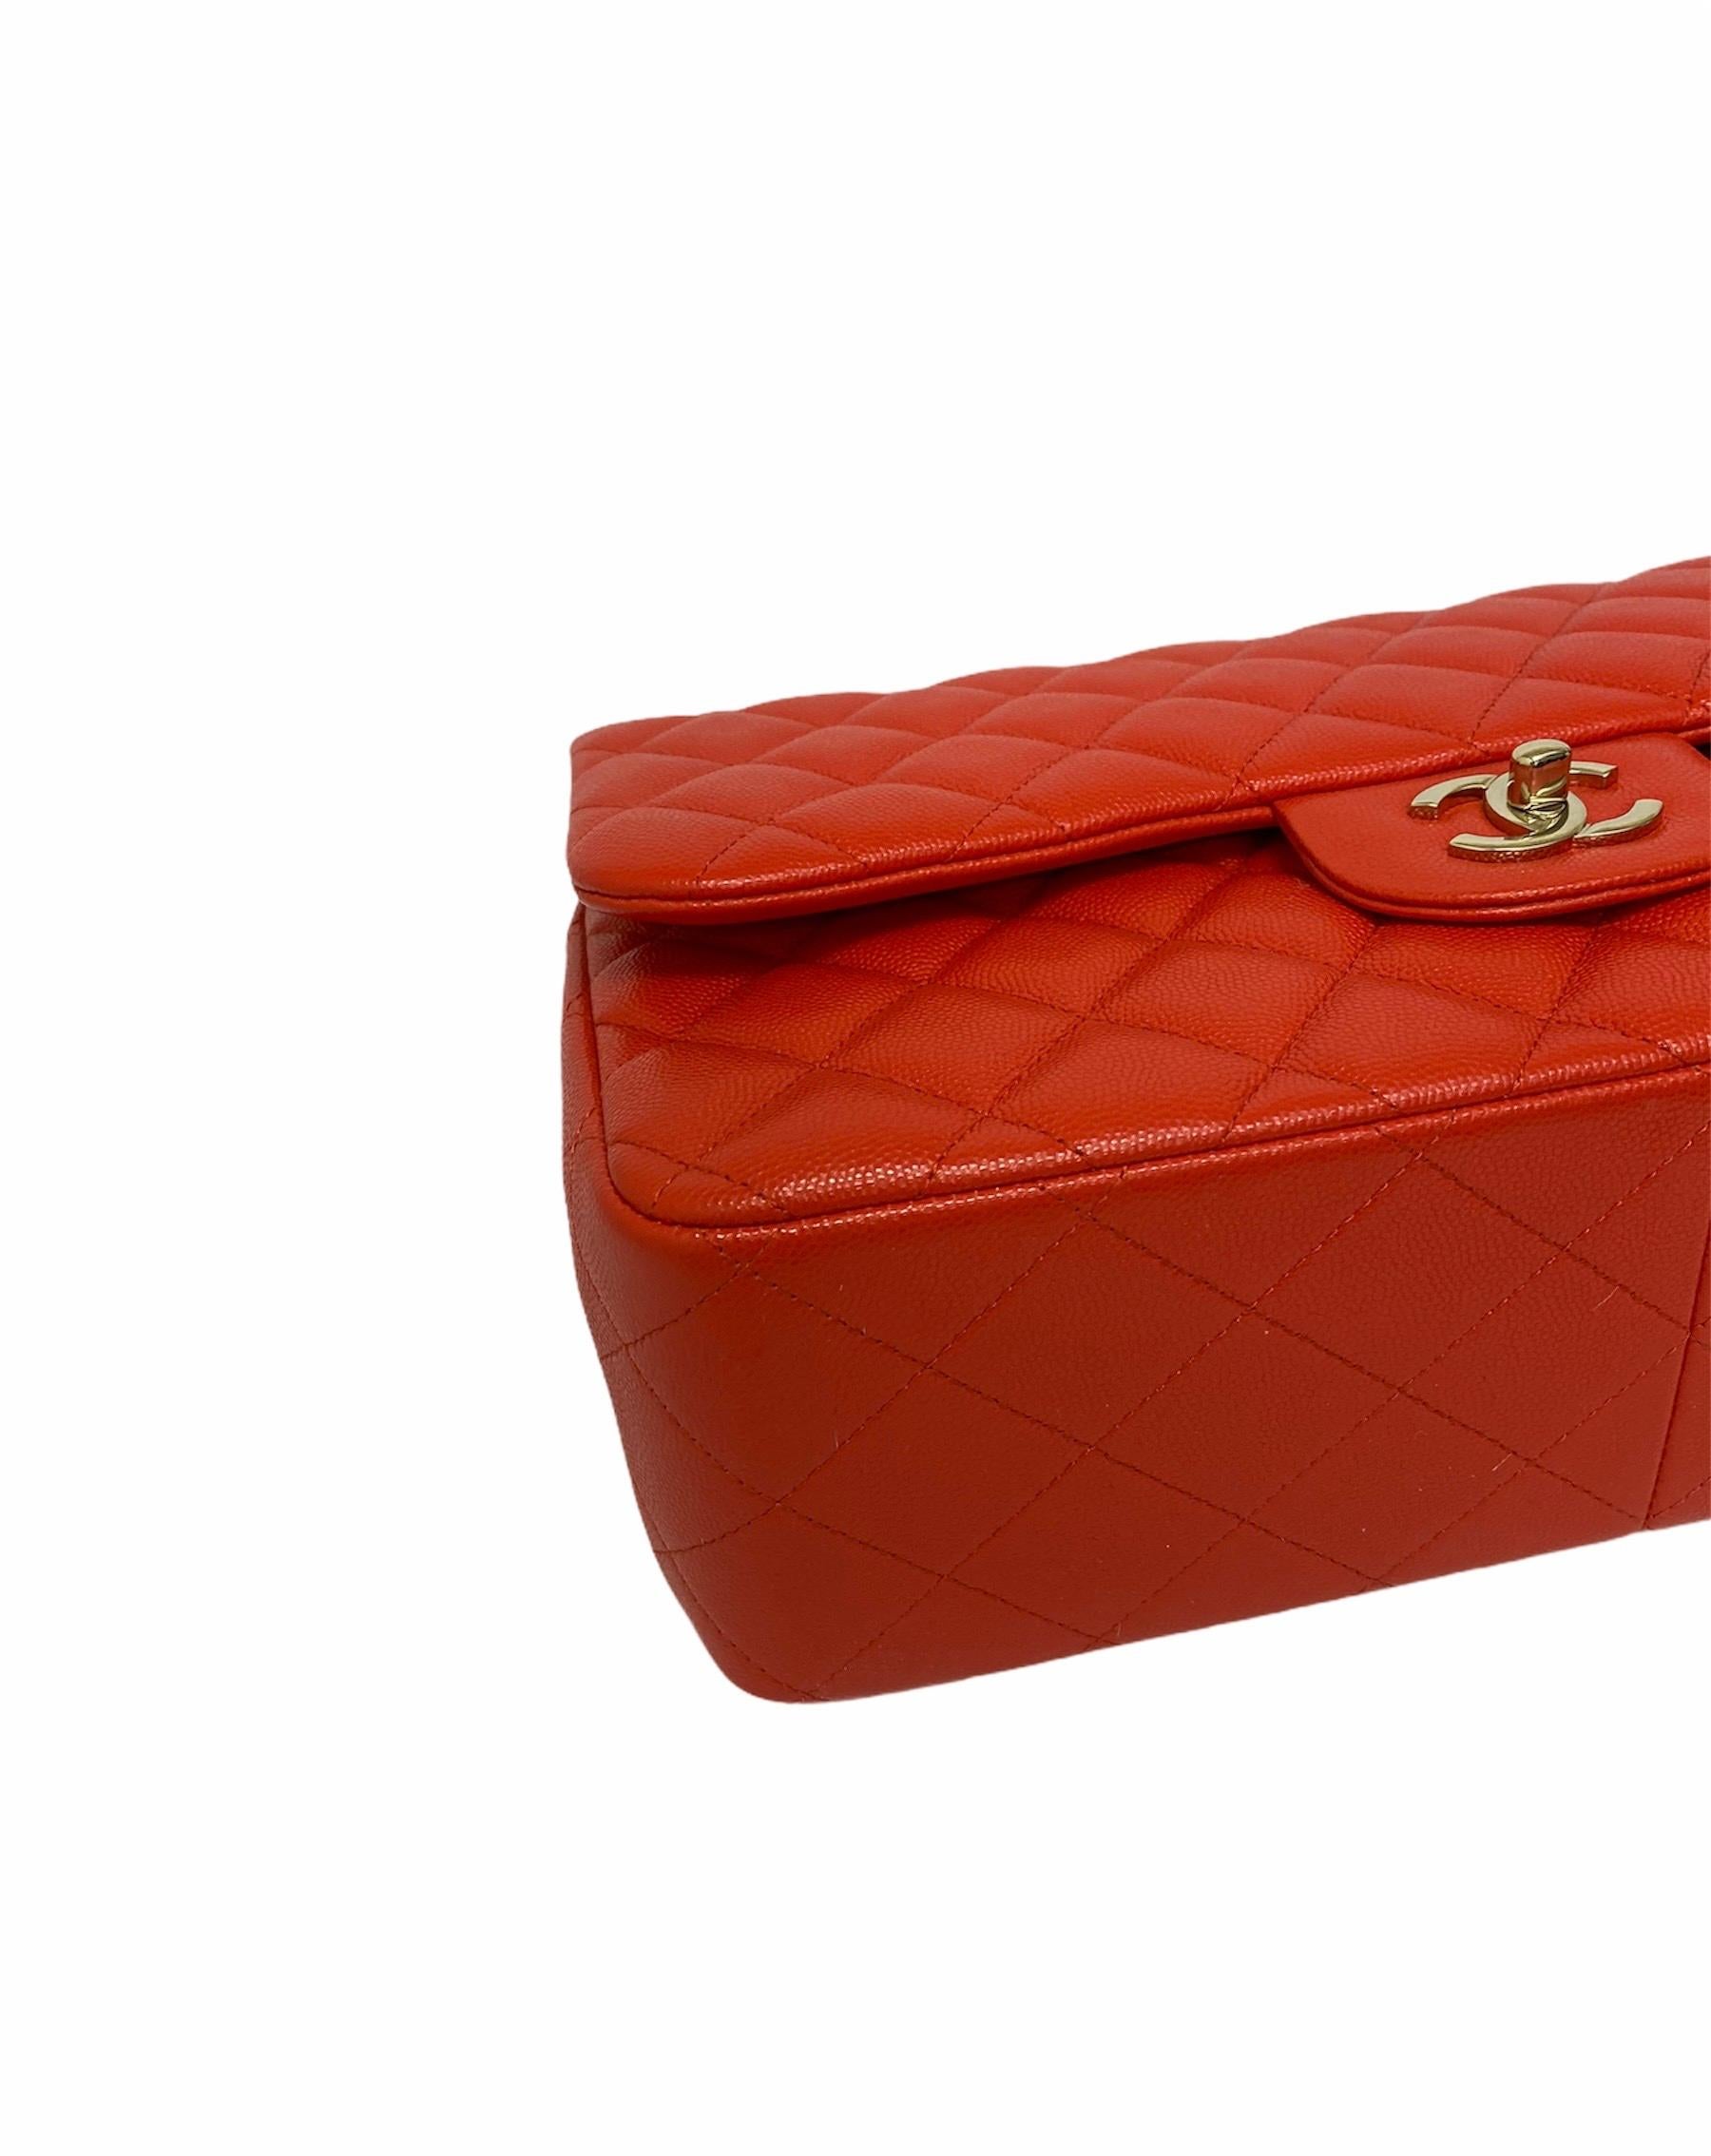 2019 Chanel Red Leather Maxi Jumbo Bag In Excellent Condition In Torre Del Greco, IT